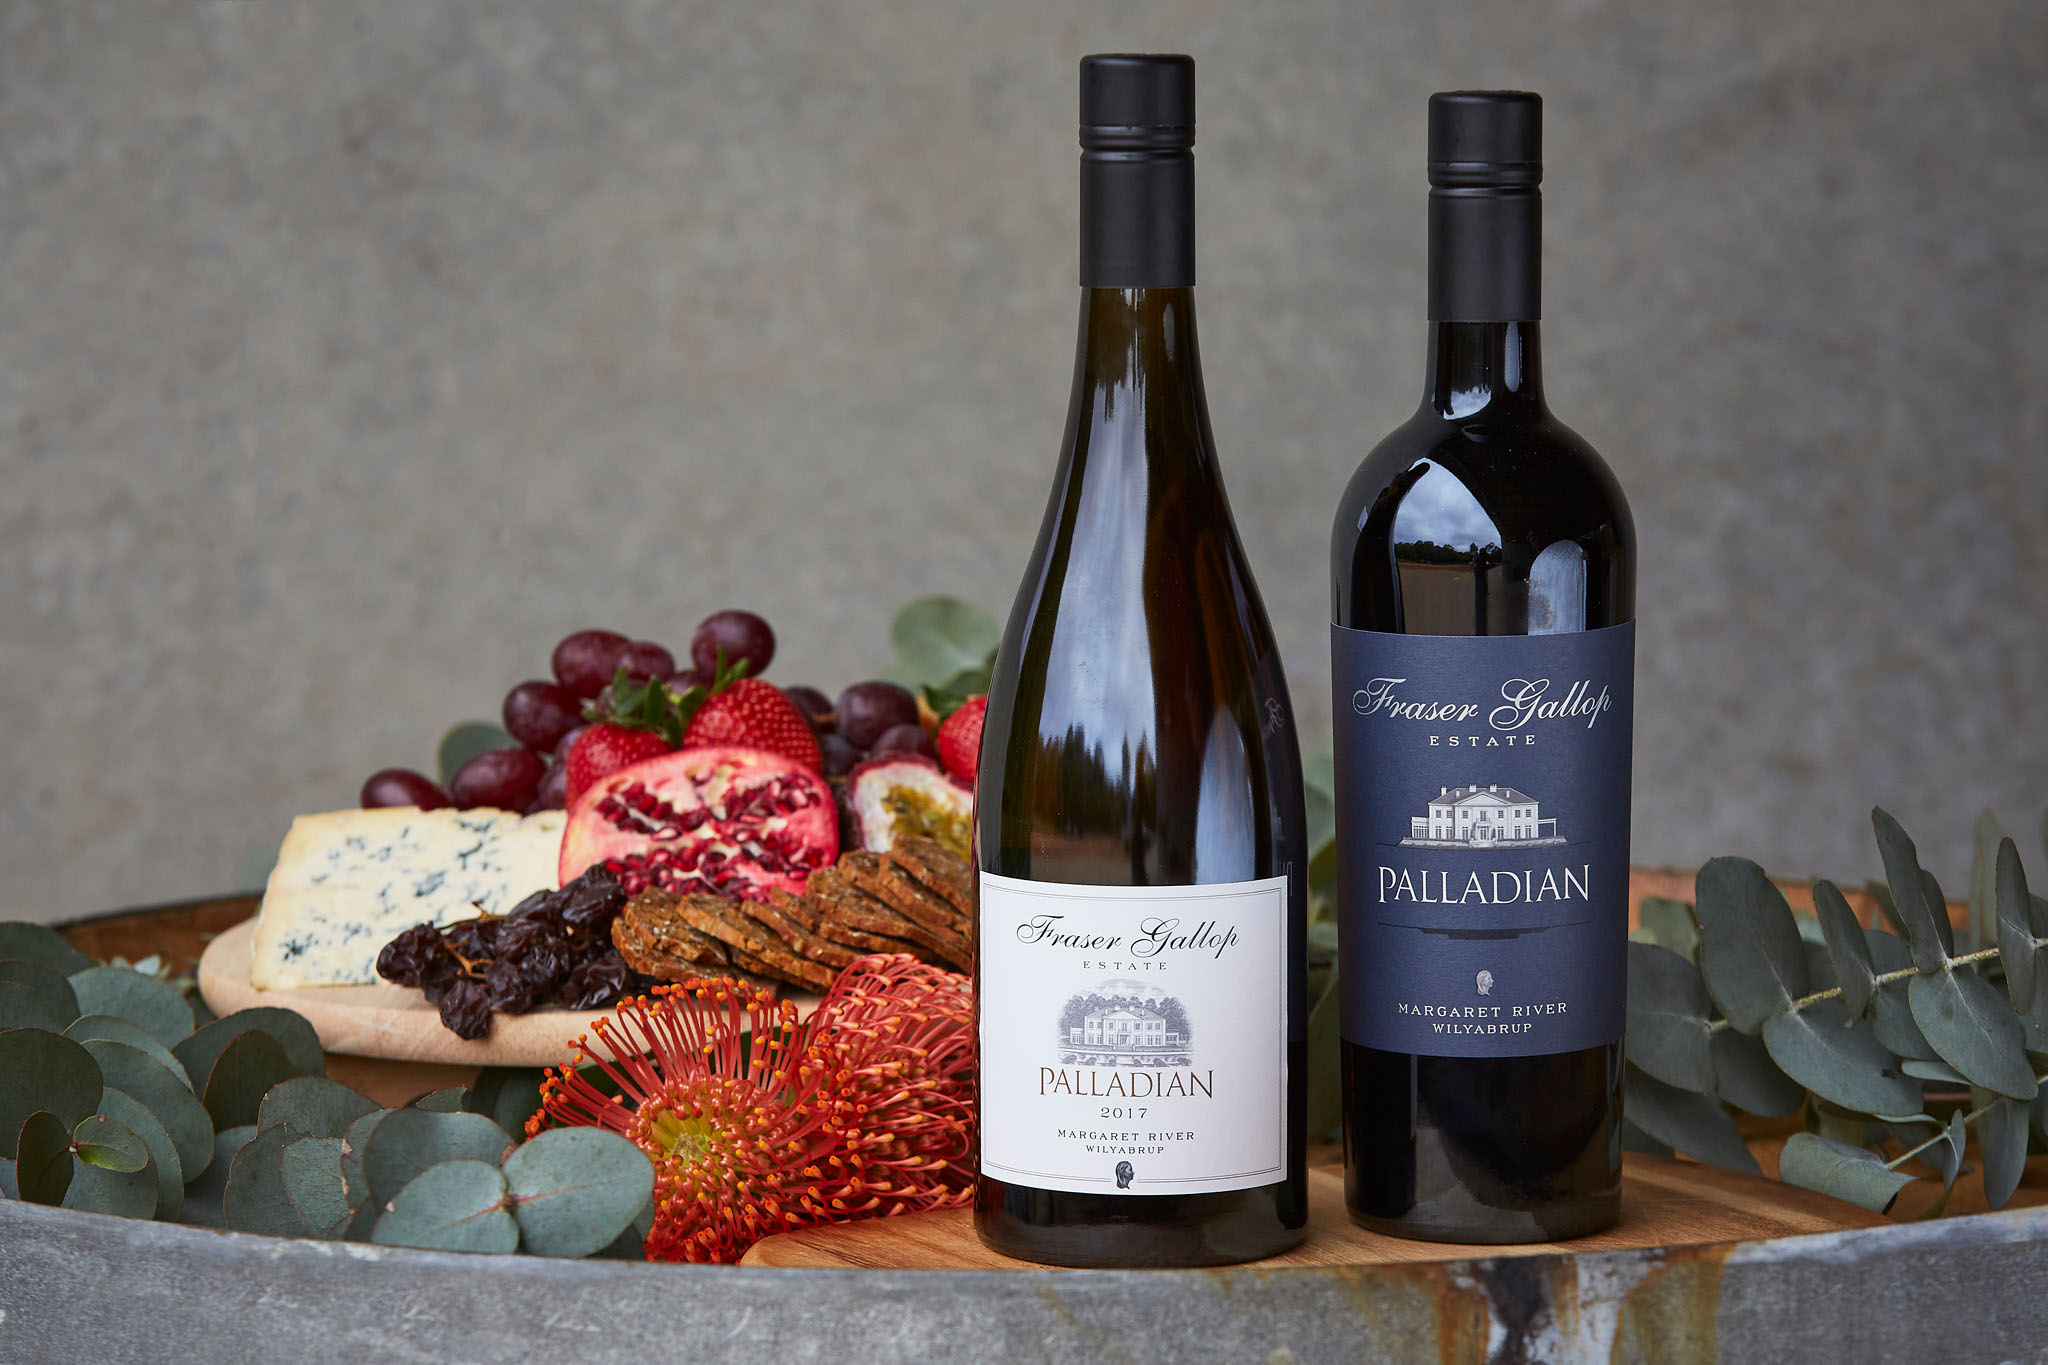 Palladian wines received 98 and 97 points from James Halliday